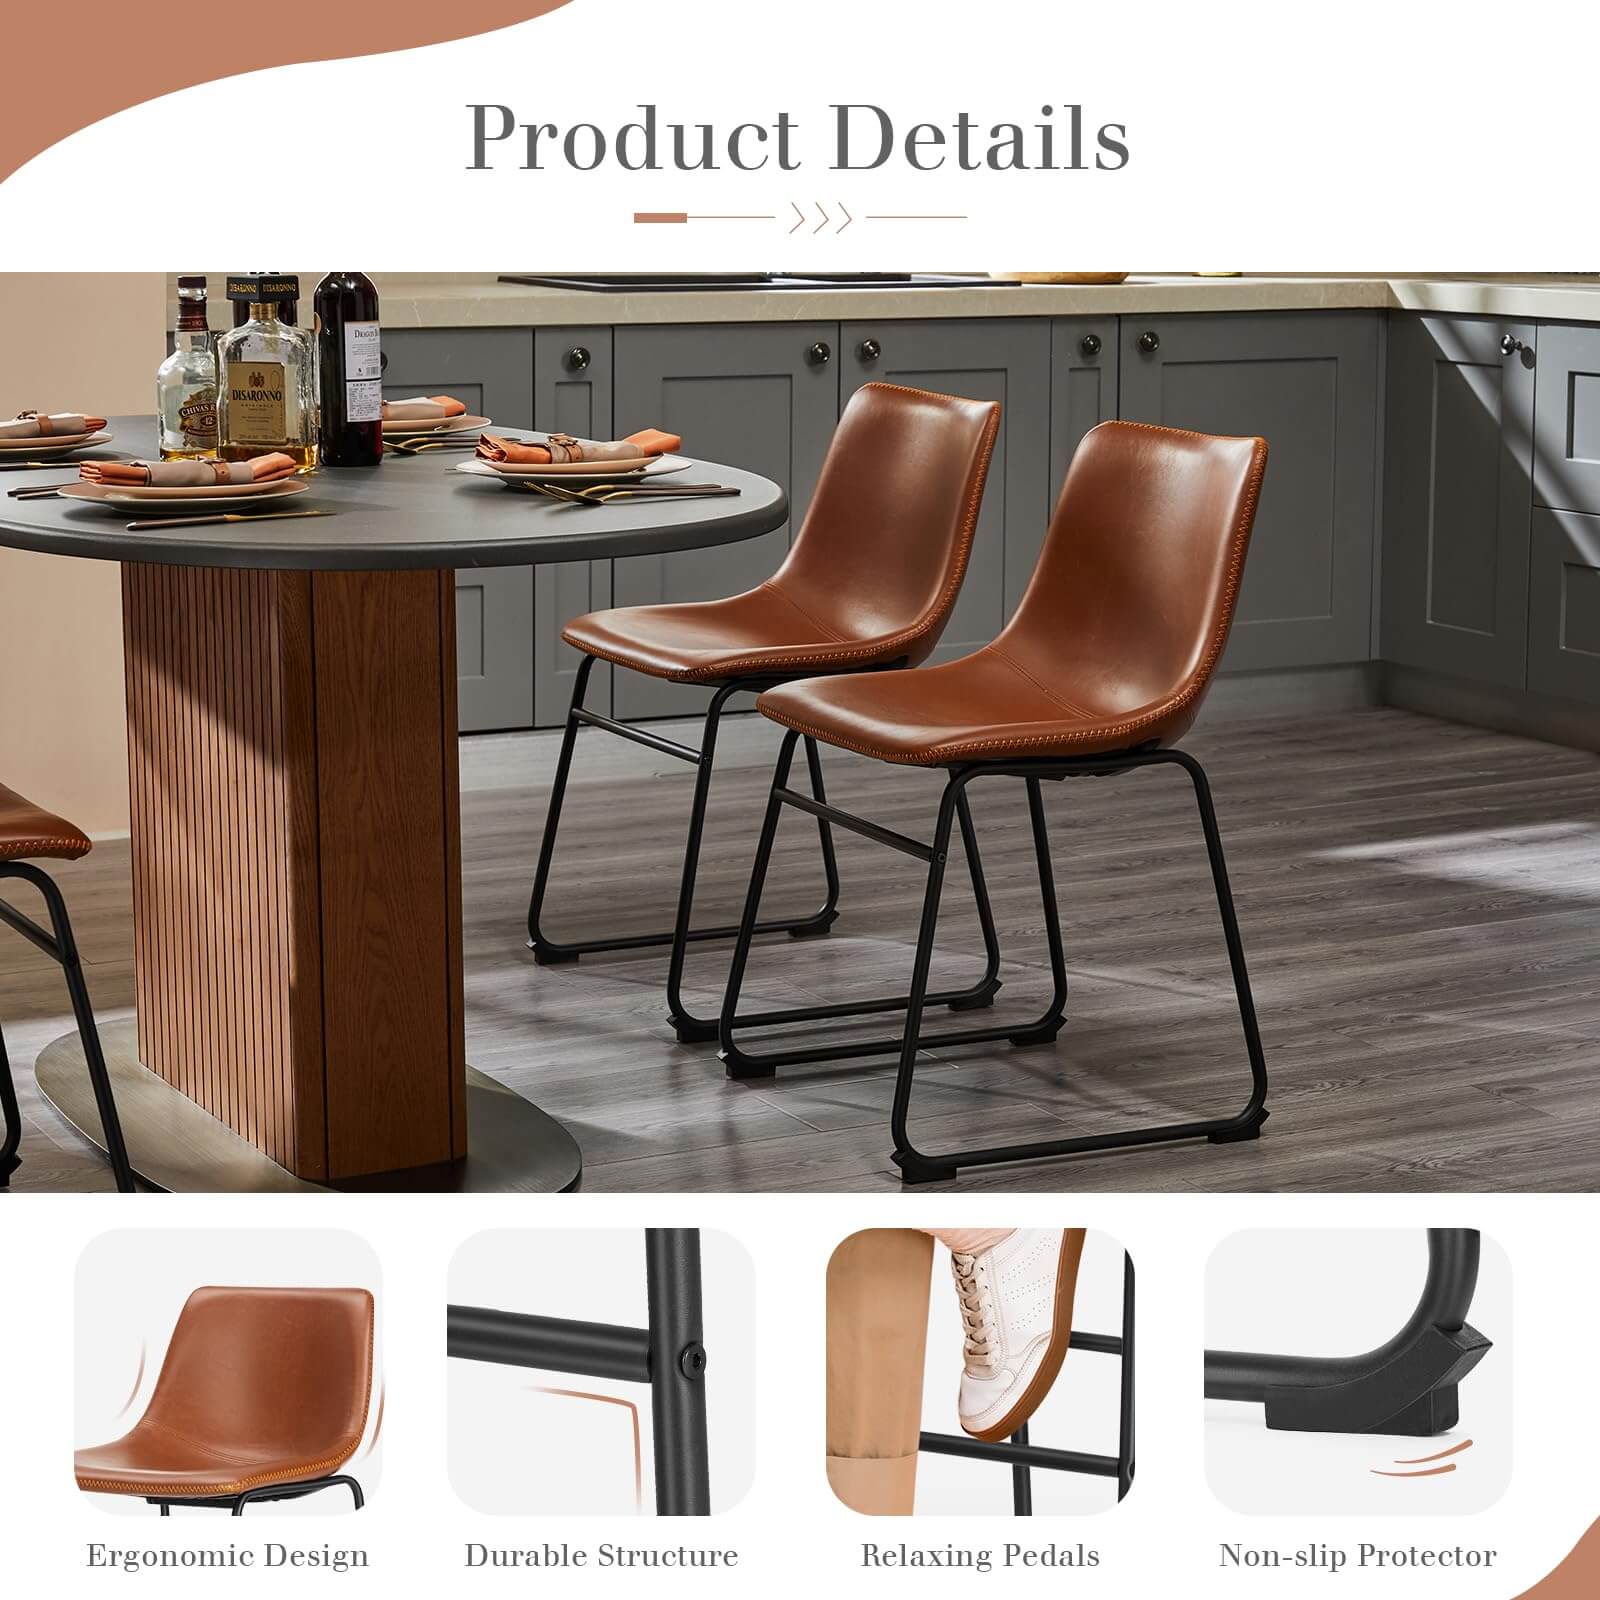 26-inch-dining-chairs#Color_Brown#Size_18 in